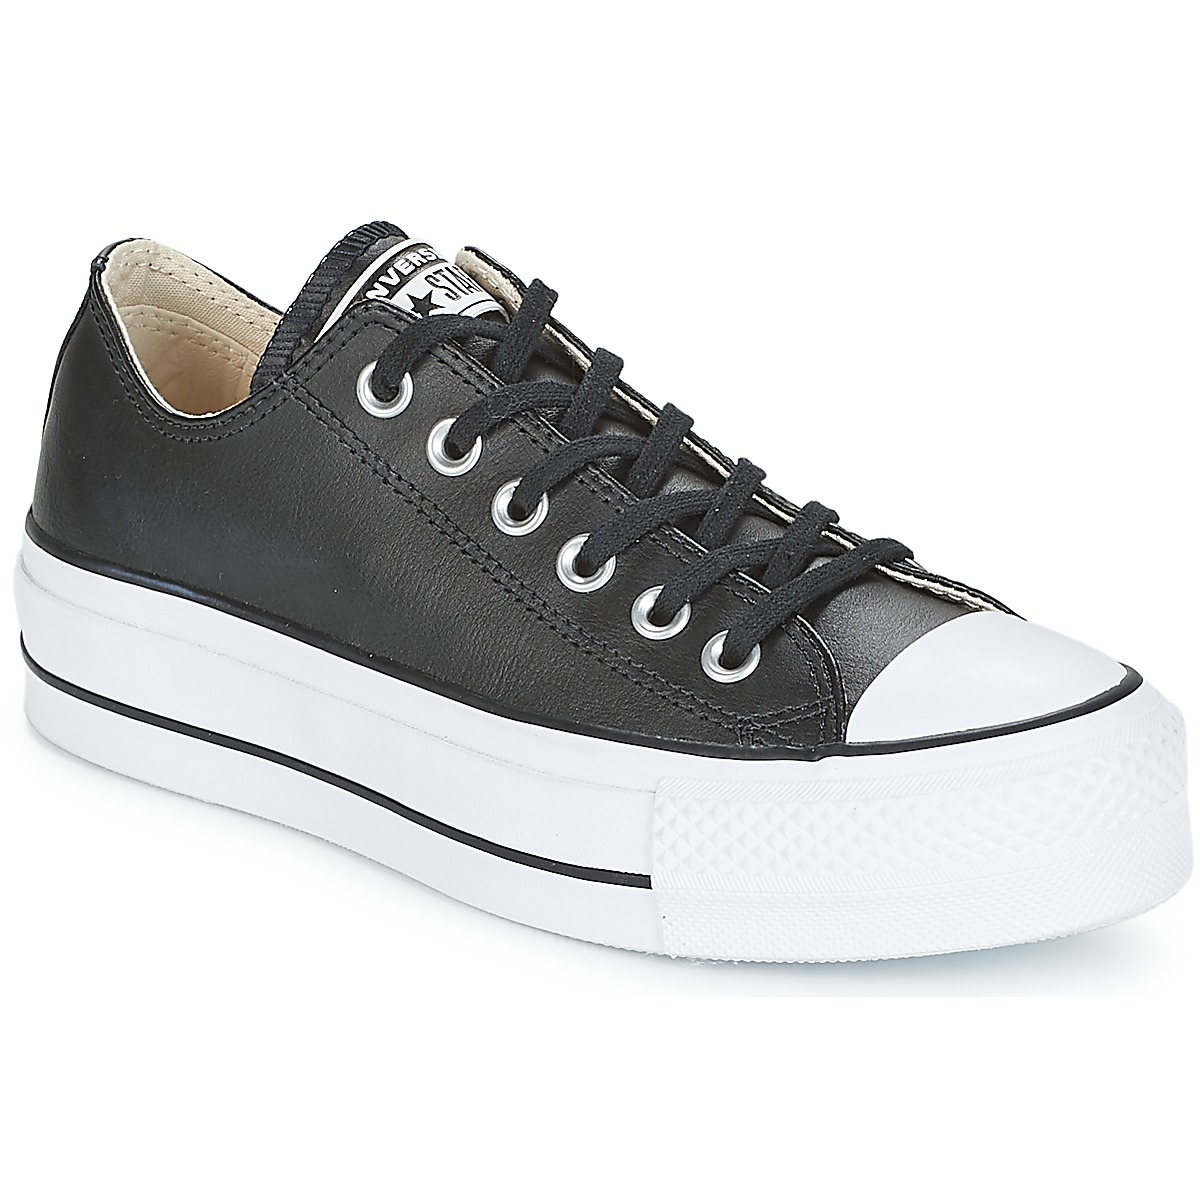 Kengät Converse CHUCK TAYLOR ALL STAR LIFT CLEAN OX LEATHER 40